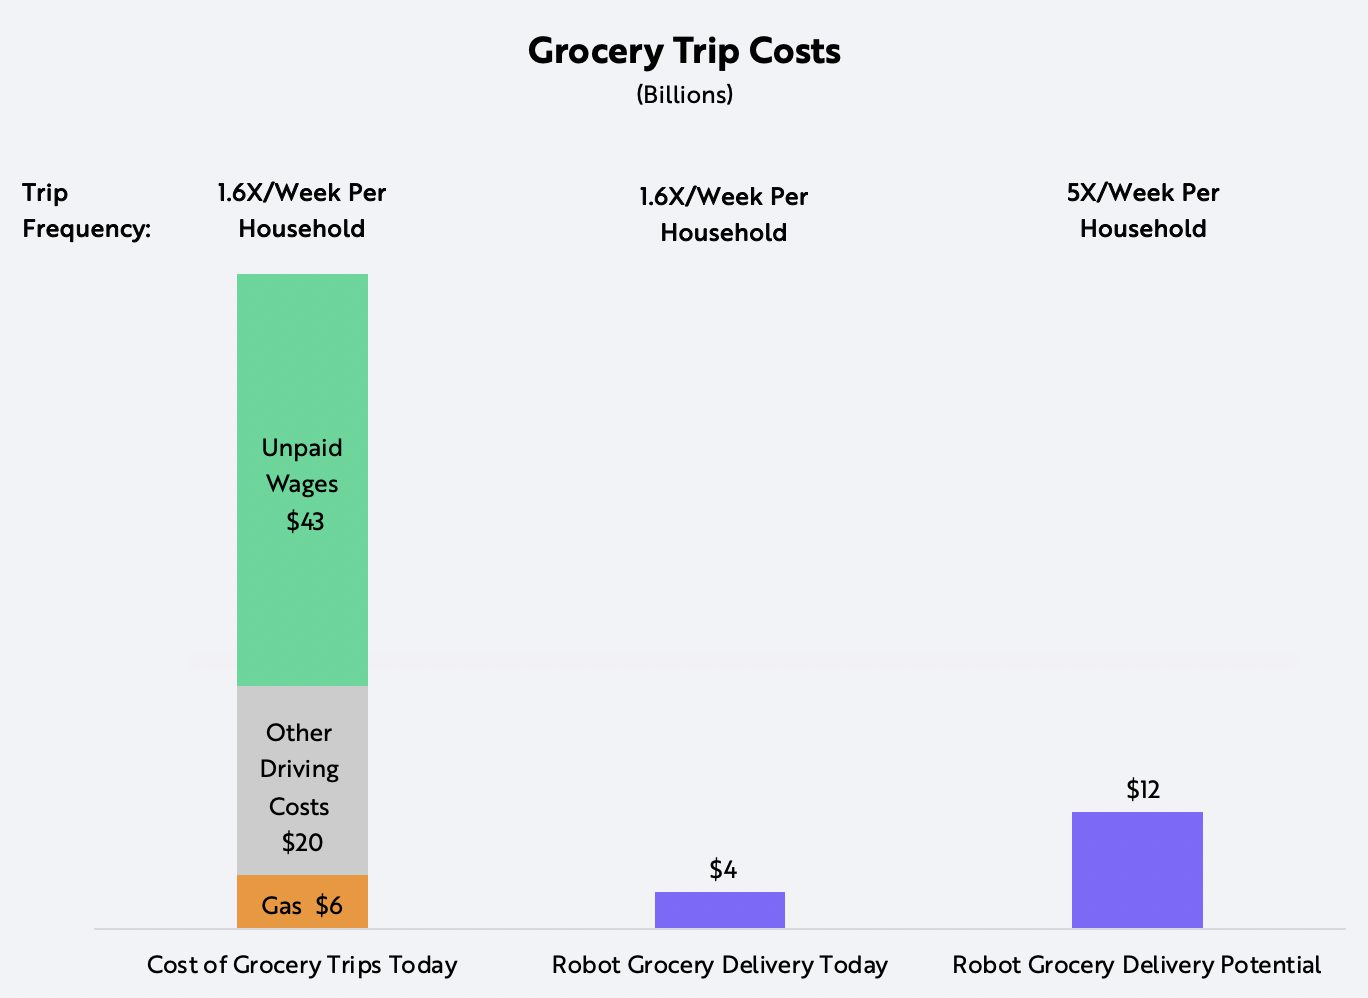 ARK Robot Delivery Grocery Trip Costs